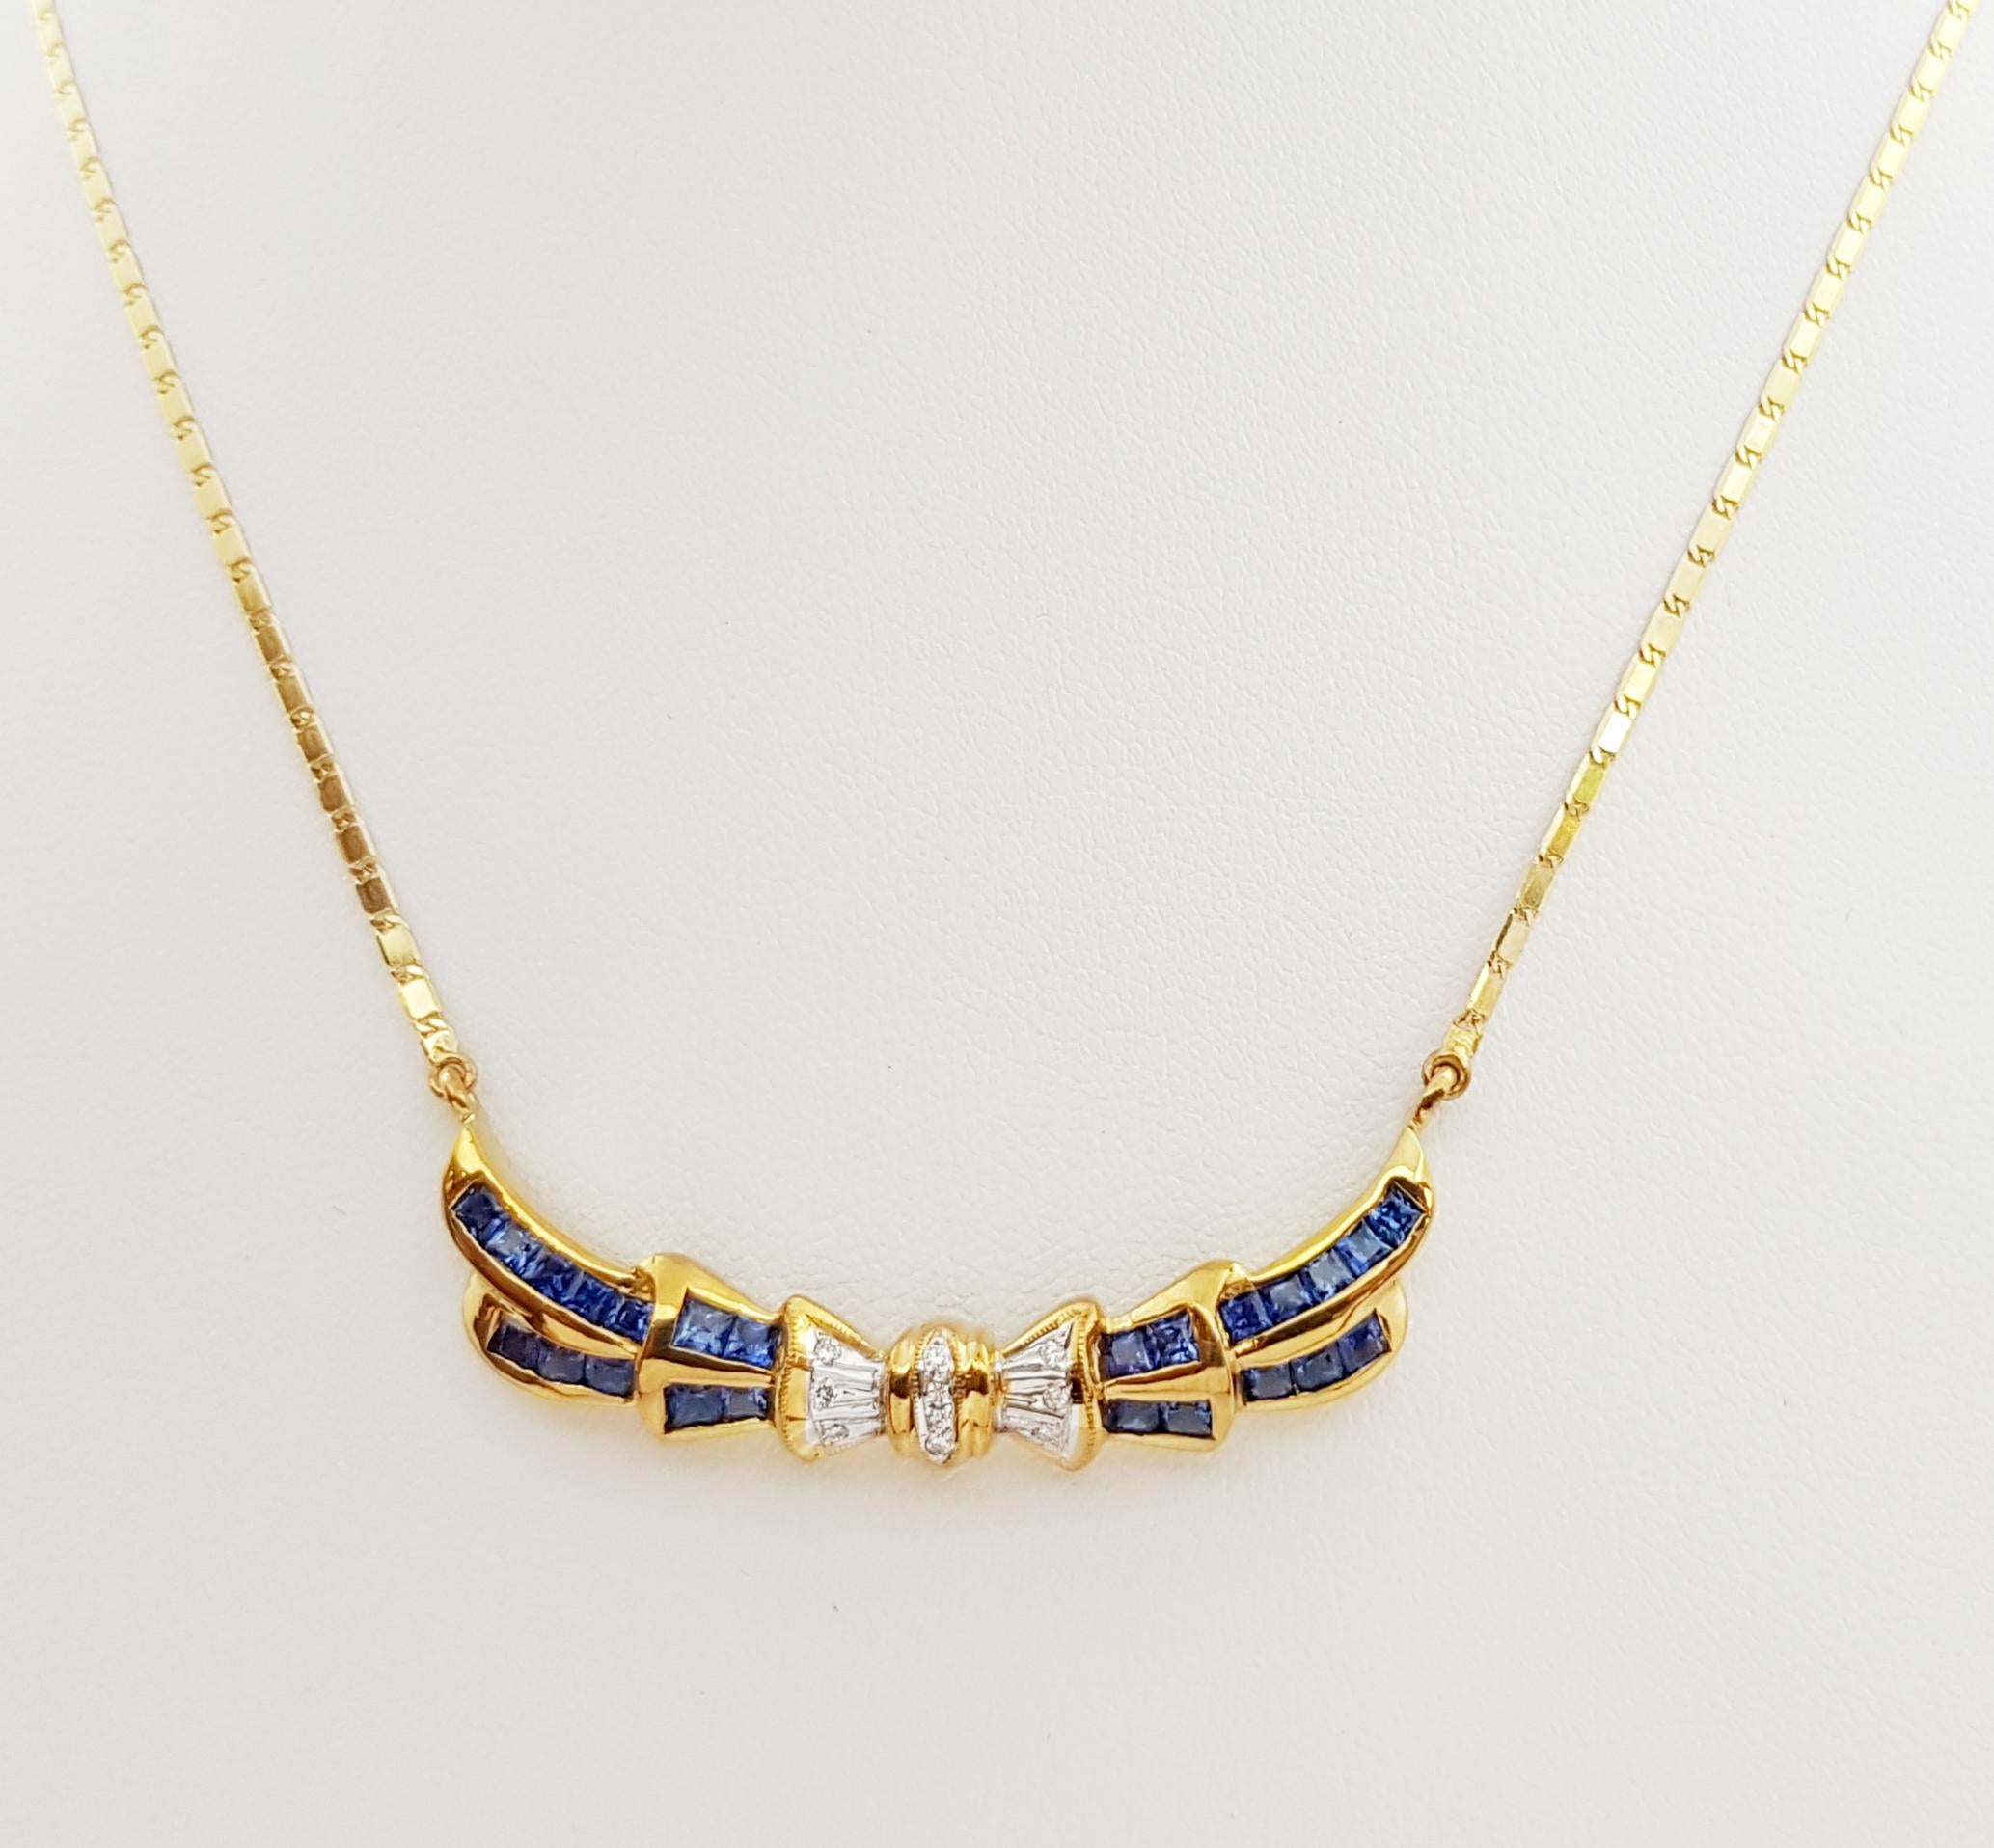 Blue Sapphire 1.36 carats with Diamond 0.06 carat Necklace set in 18 Karat Gold Settings

Width: 1.4 cm 
Length: 44.0 cm
Total Weight: 10.27 grams

